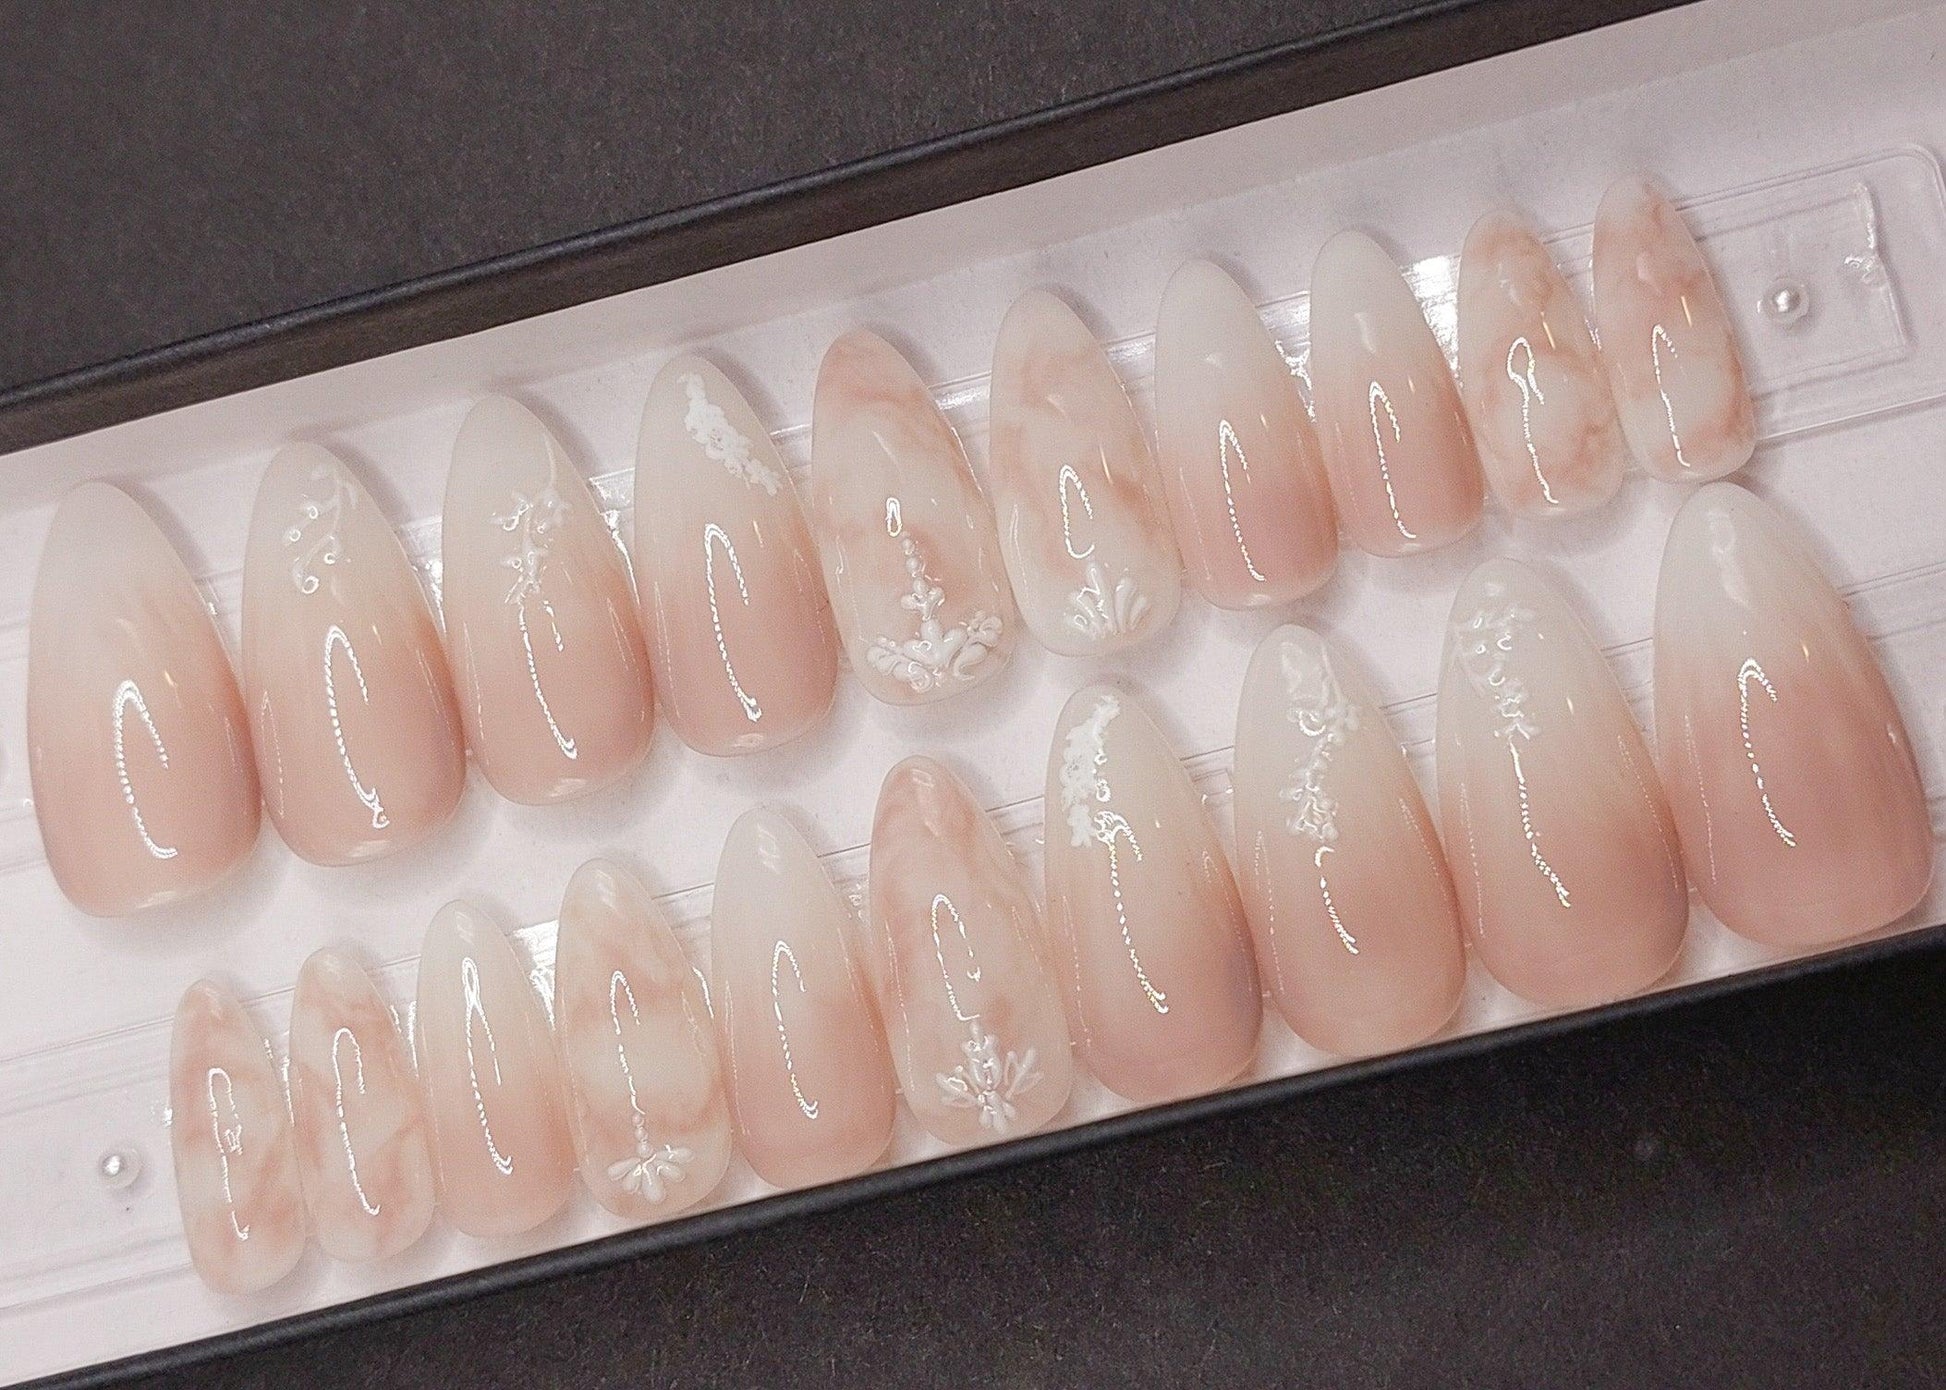 These beautiful press on nails are a soft rose color with pink and milky white ombre nails, marble nails, and 3d florals. Shown in a long almond shape.